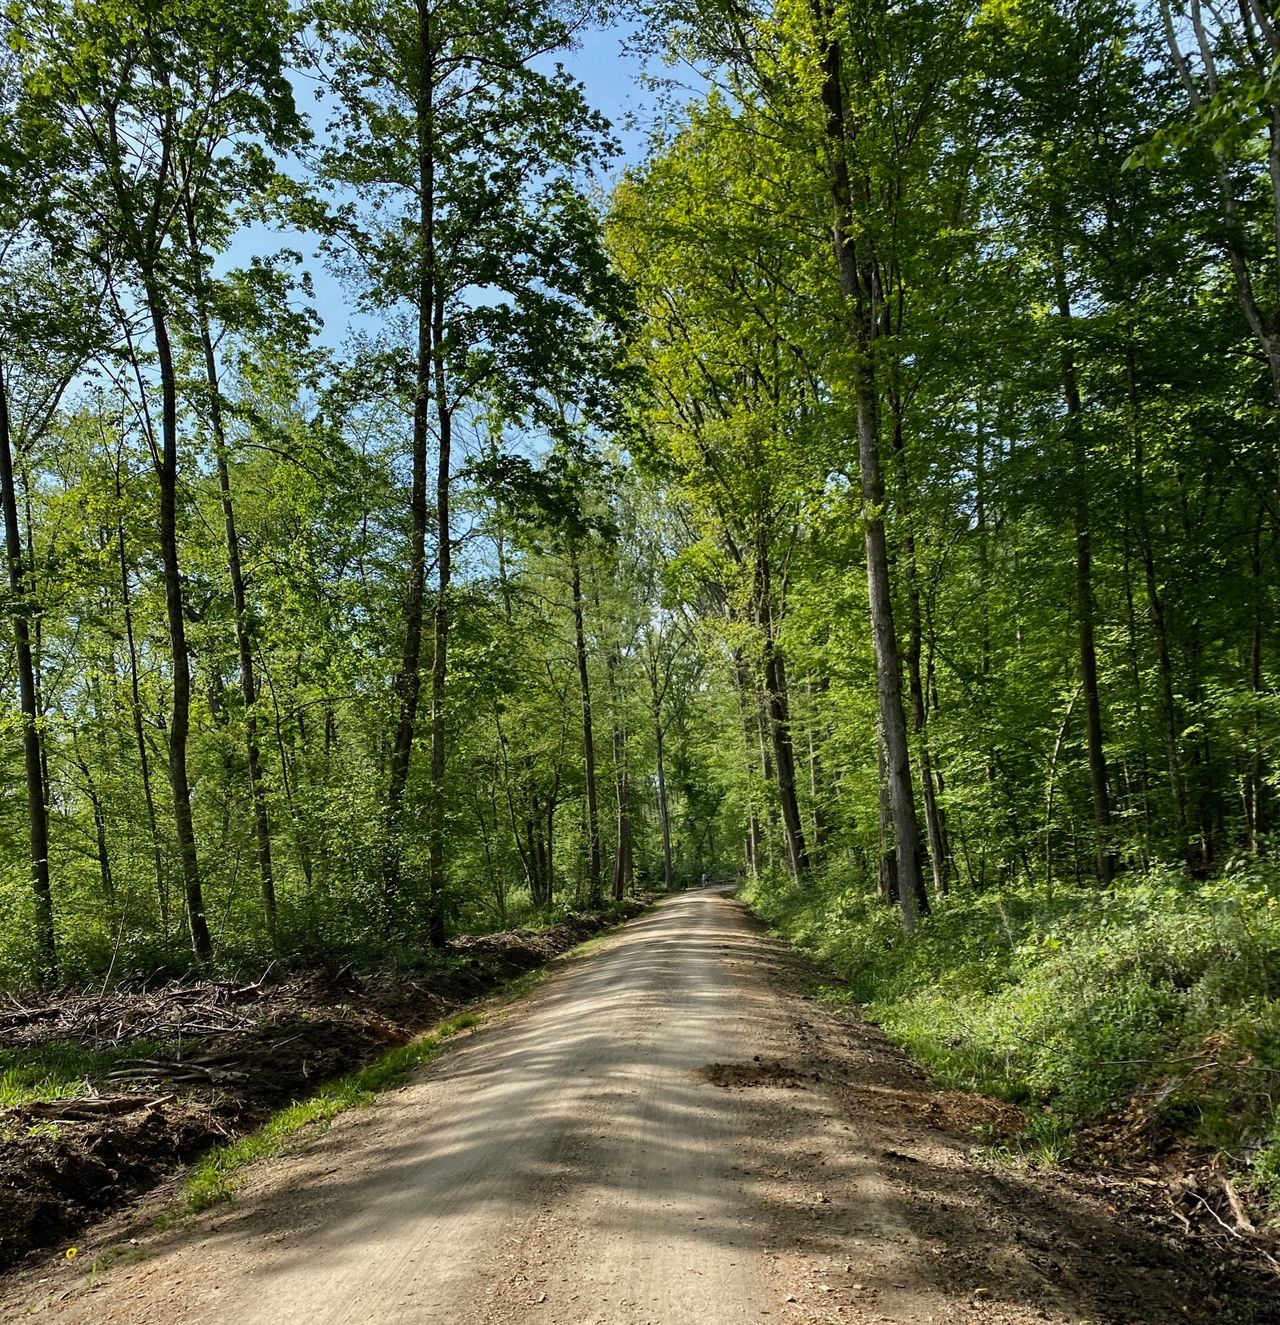 Gravel road through a forest